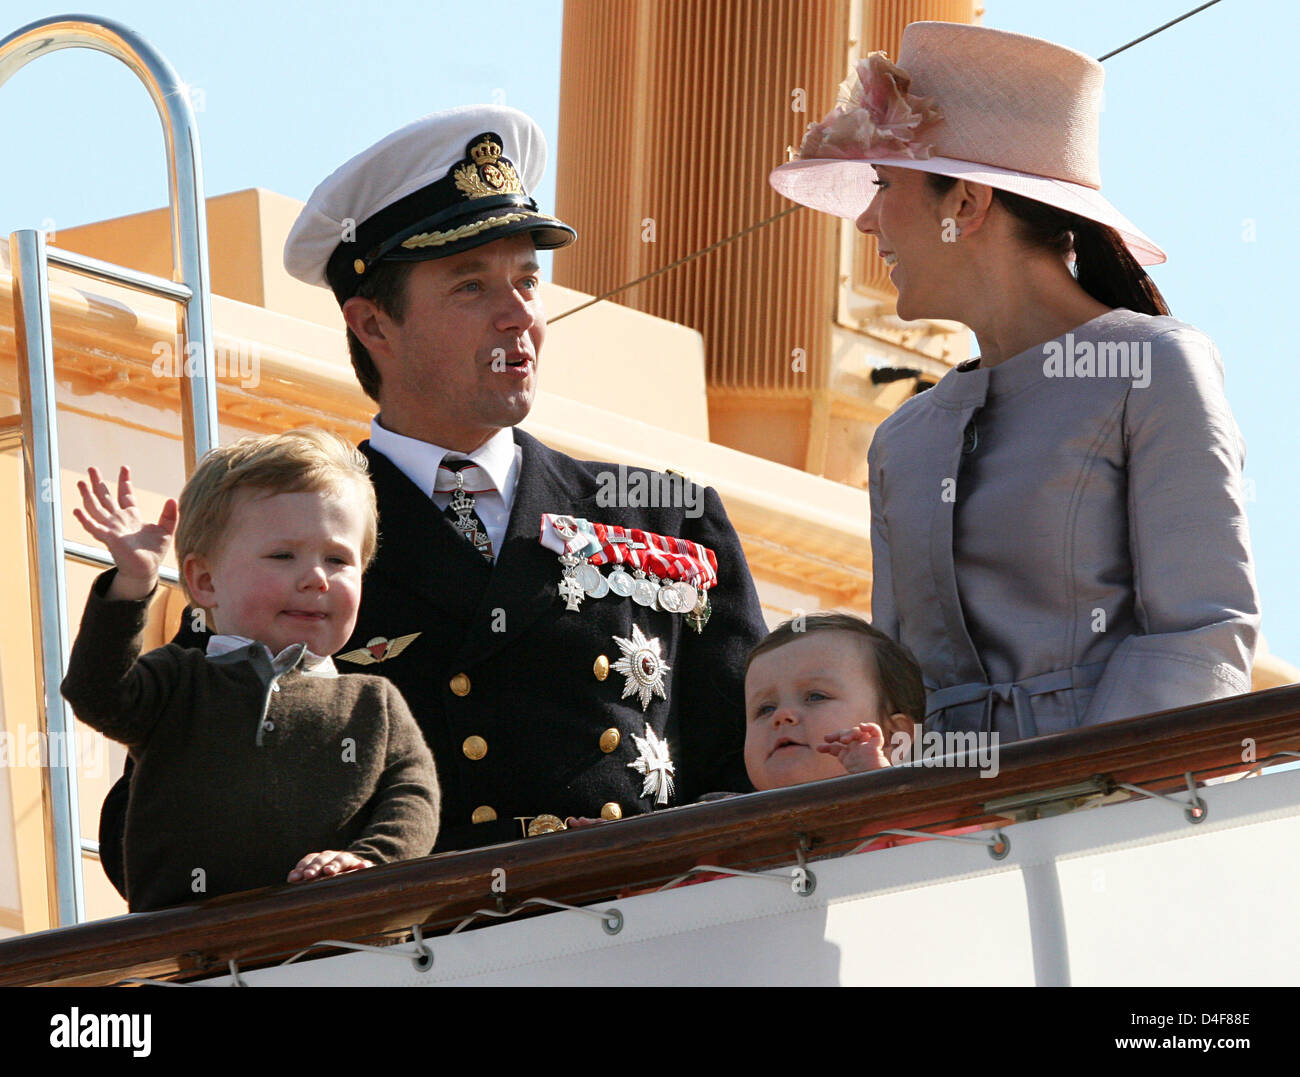 crown-prince-frederik-and-princess-mary-of-denmark-and-their-children-D4F88E.jpg